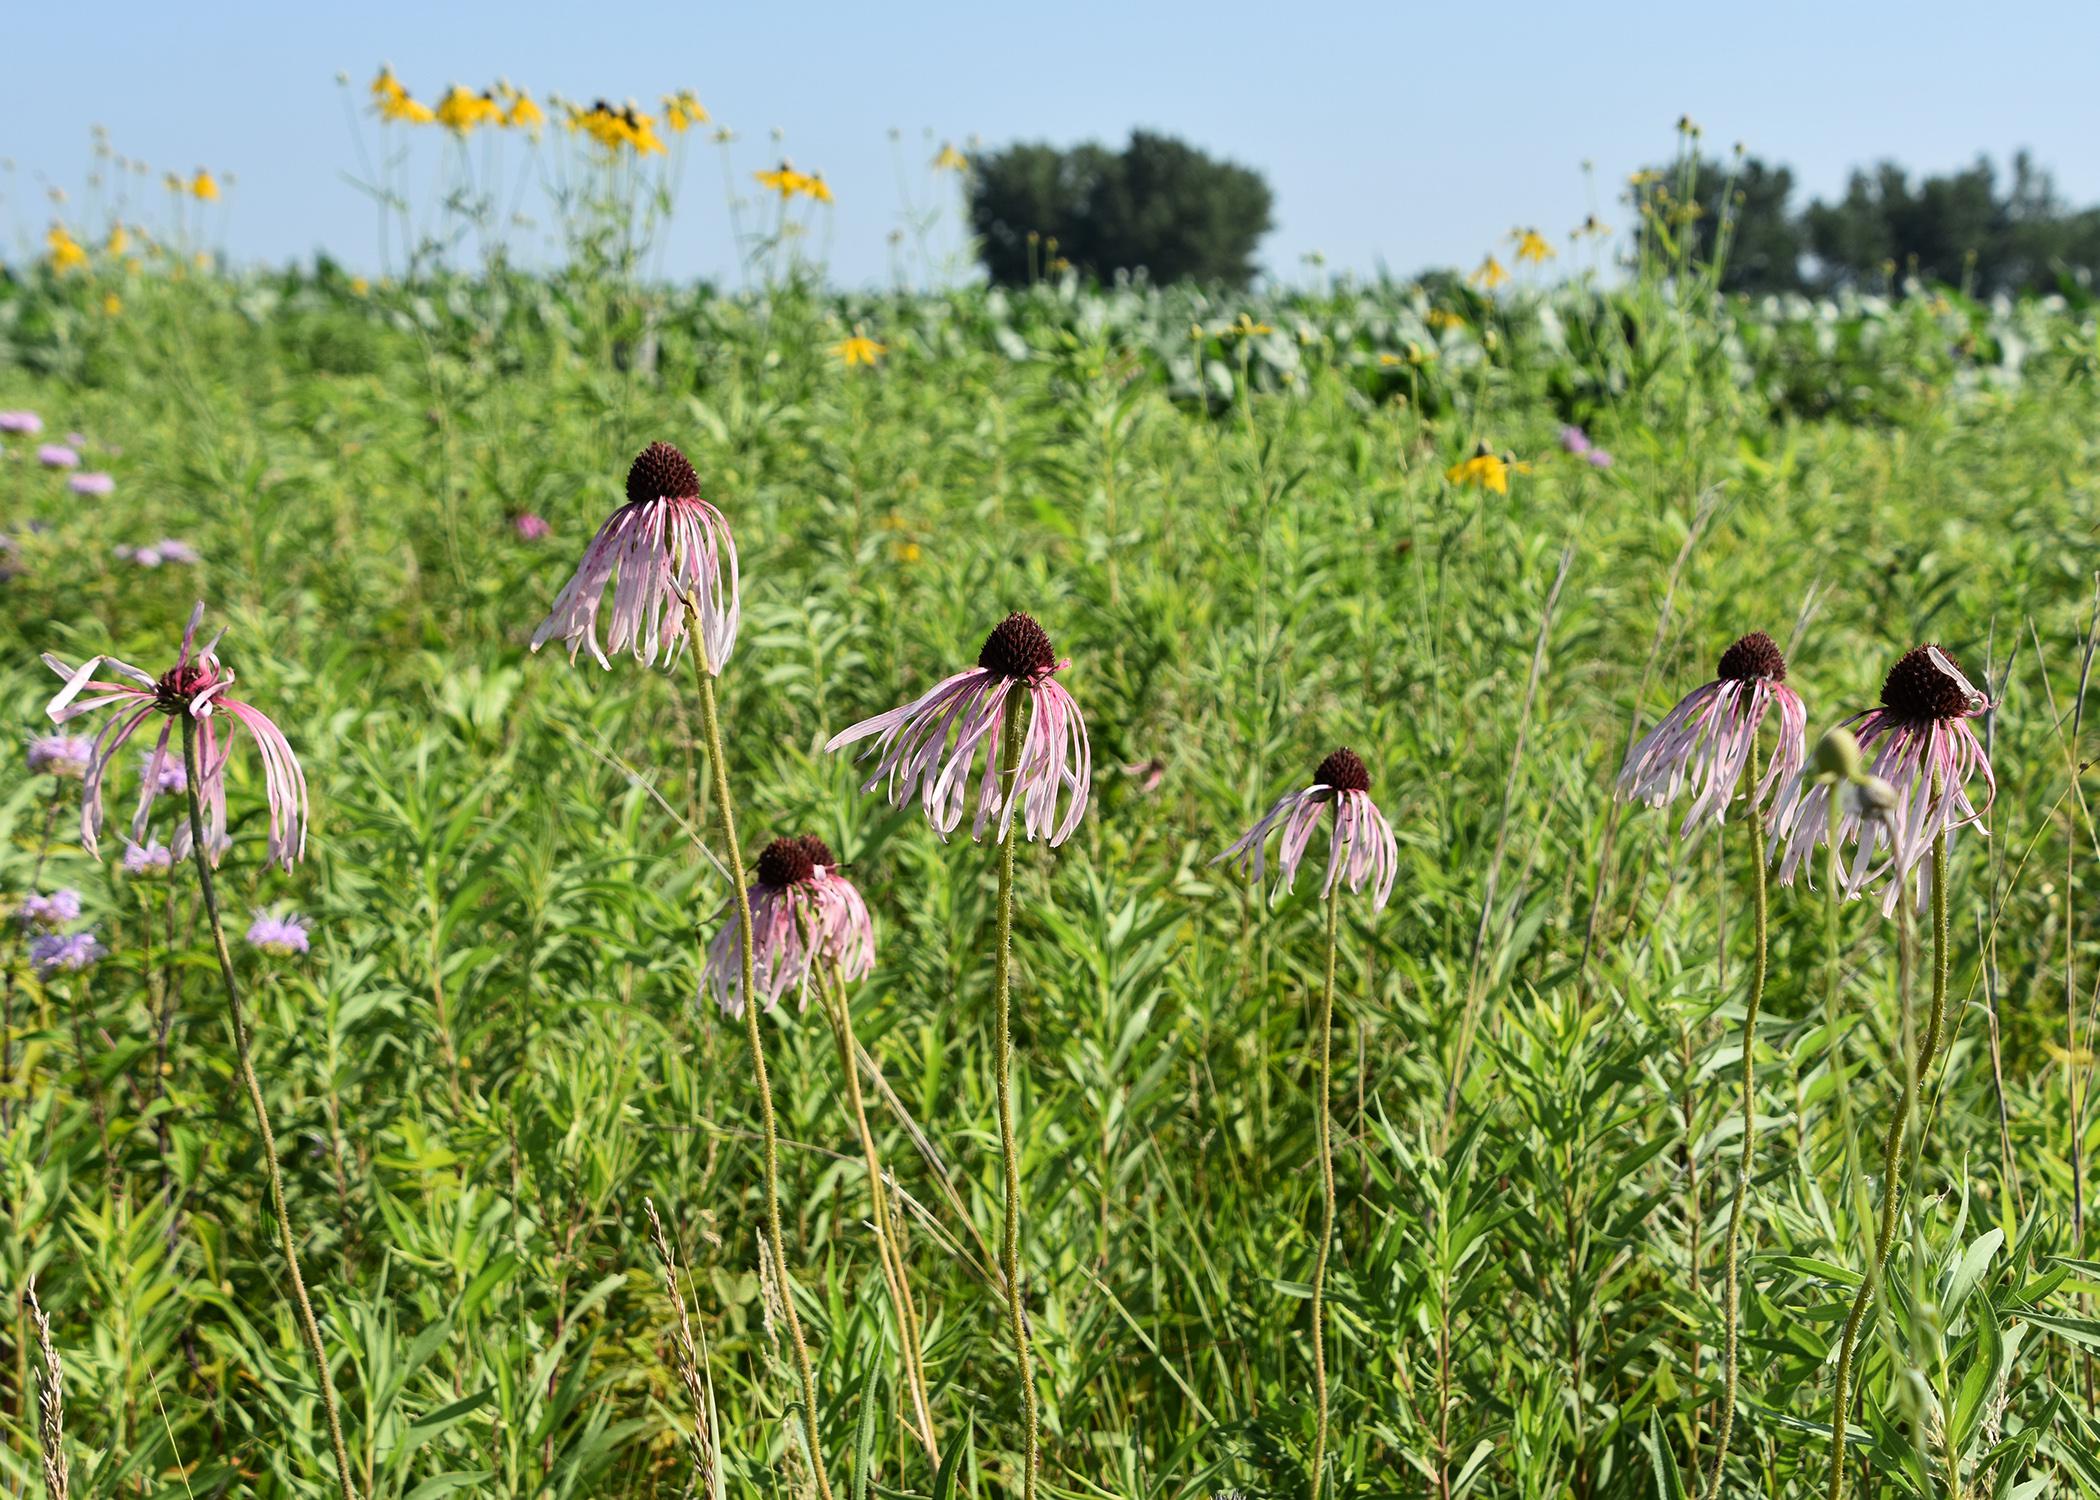 These coneflowers blooming alongside the road between Nebraska and South Dakota are similar to those growing in Mississippi. (Photo by MSU Extension Service/Gary Bachman)